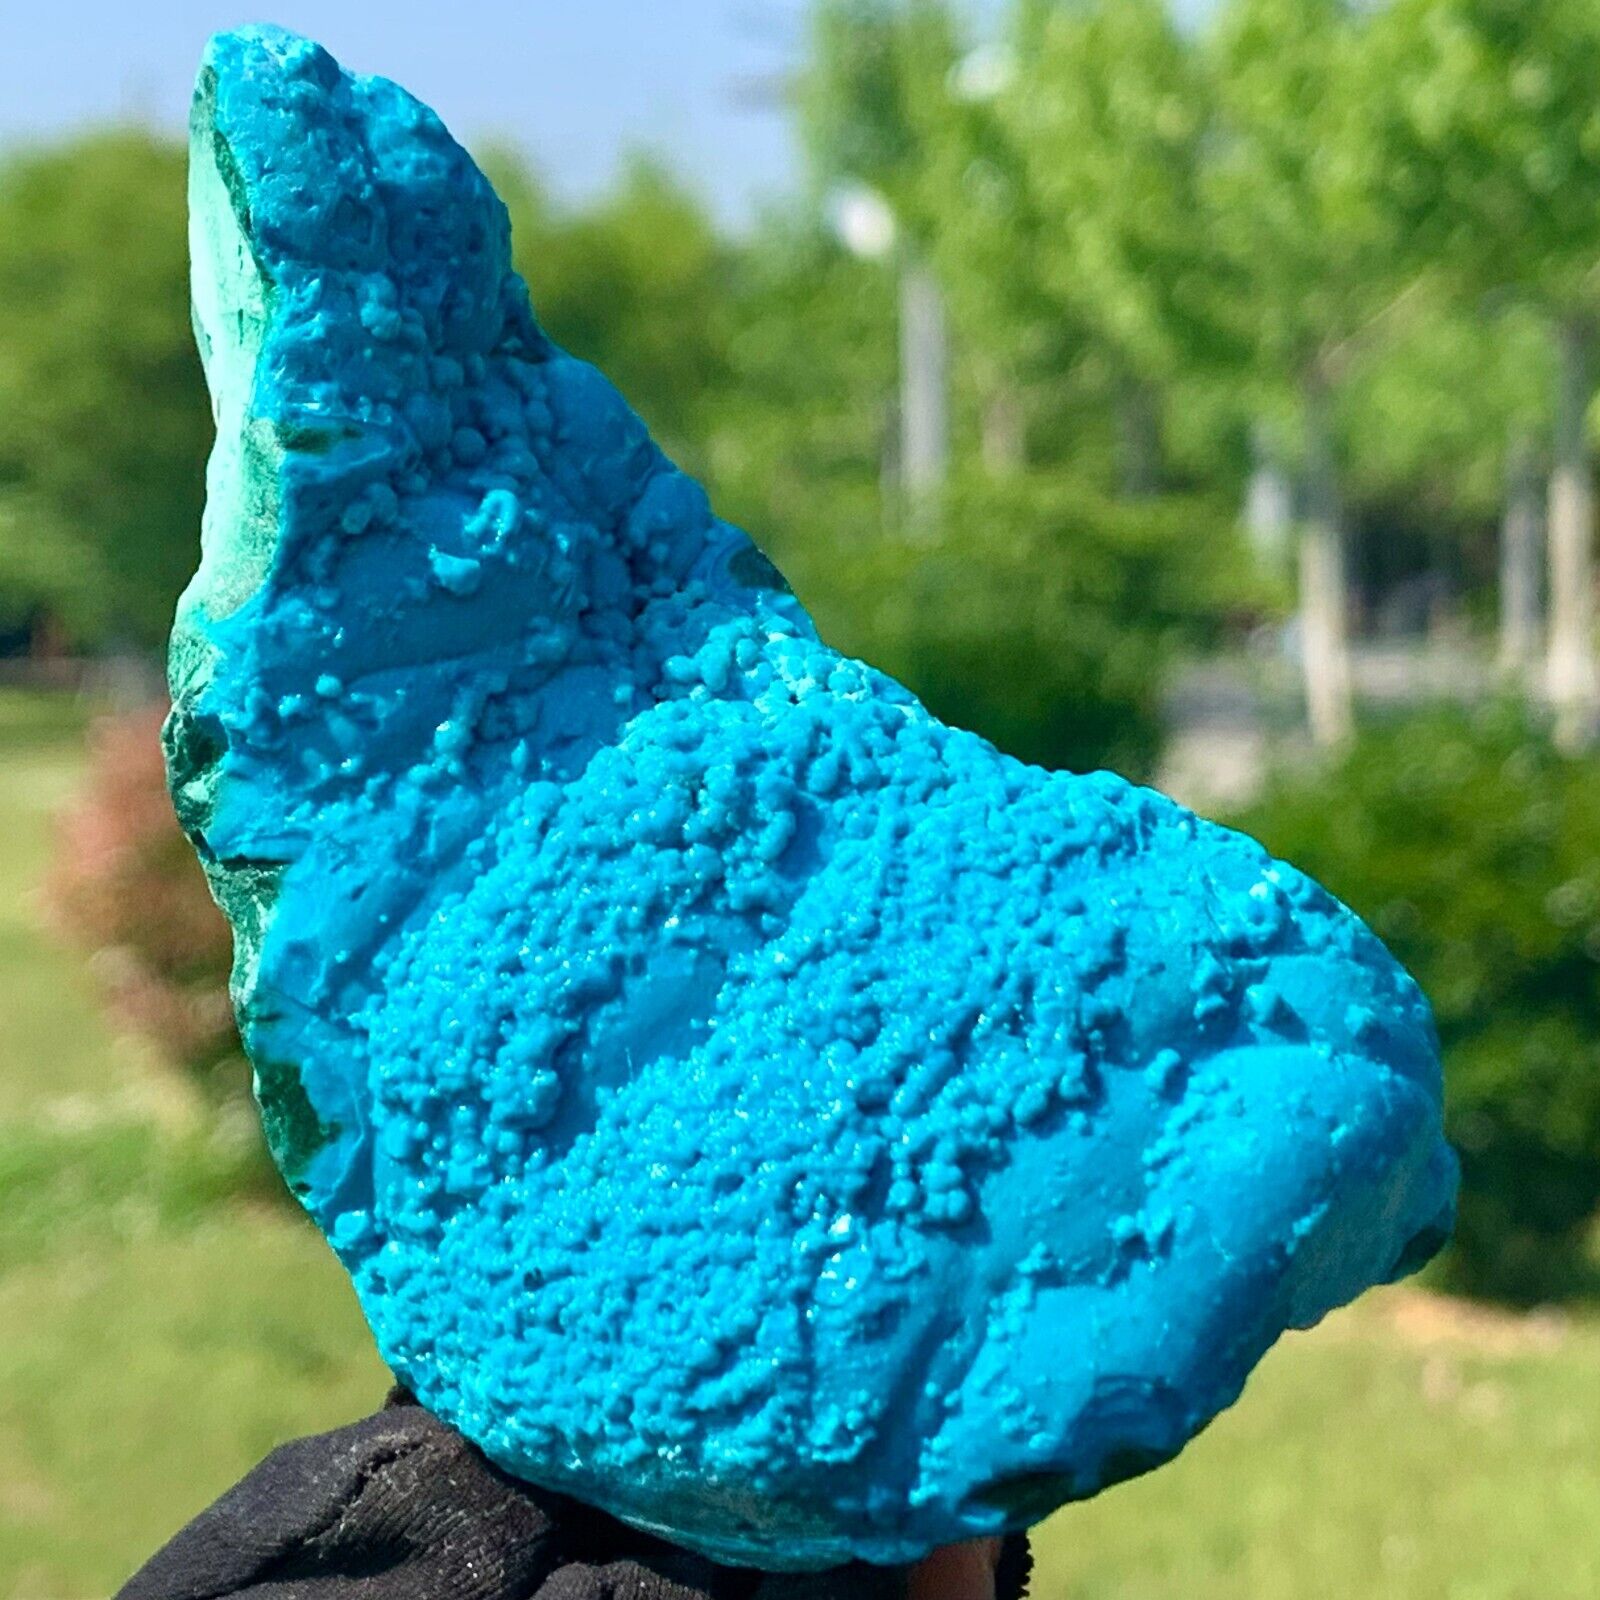 100G Natural Chrysocolla/Malachite transparent cluster rough mineral sample